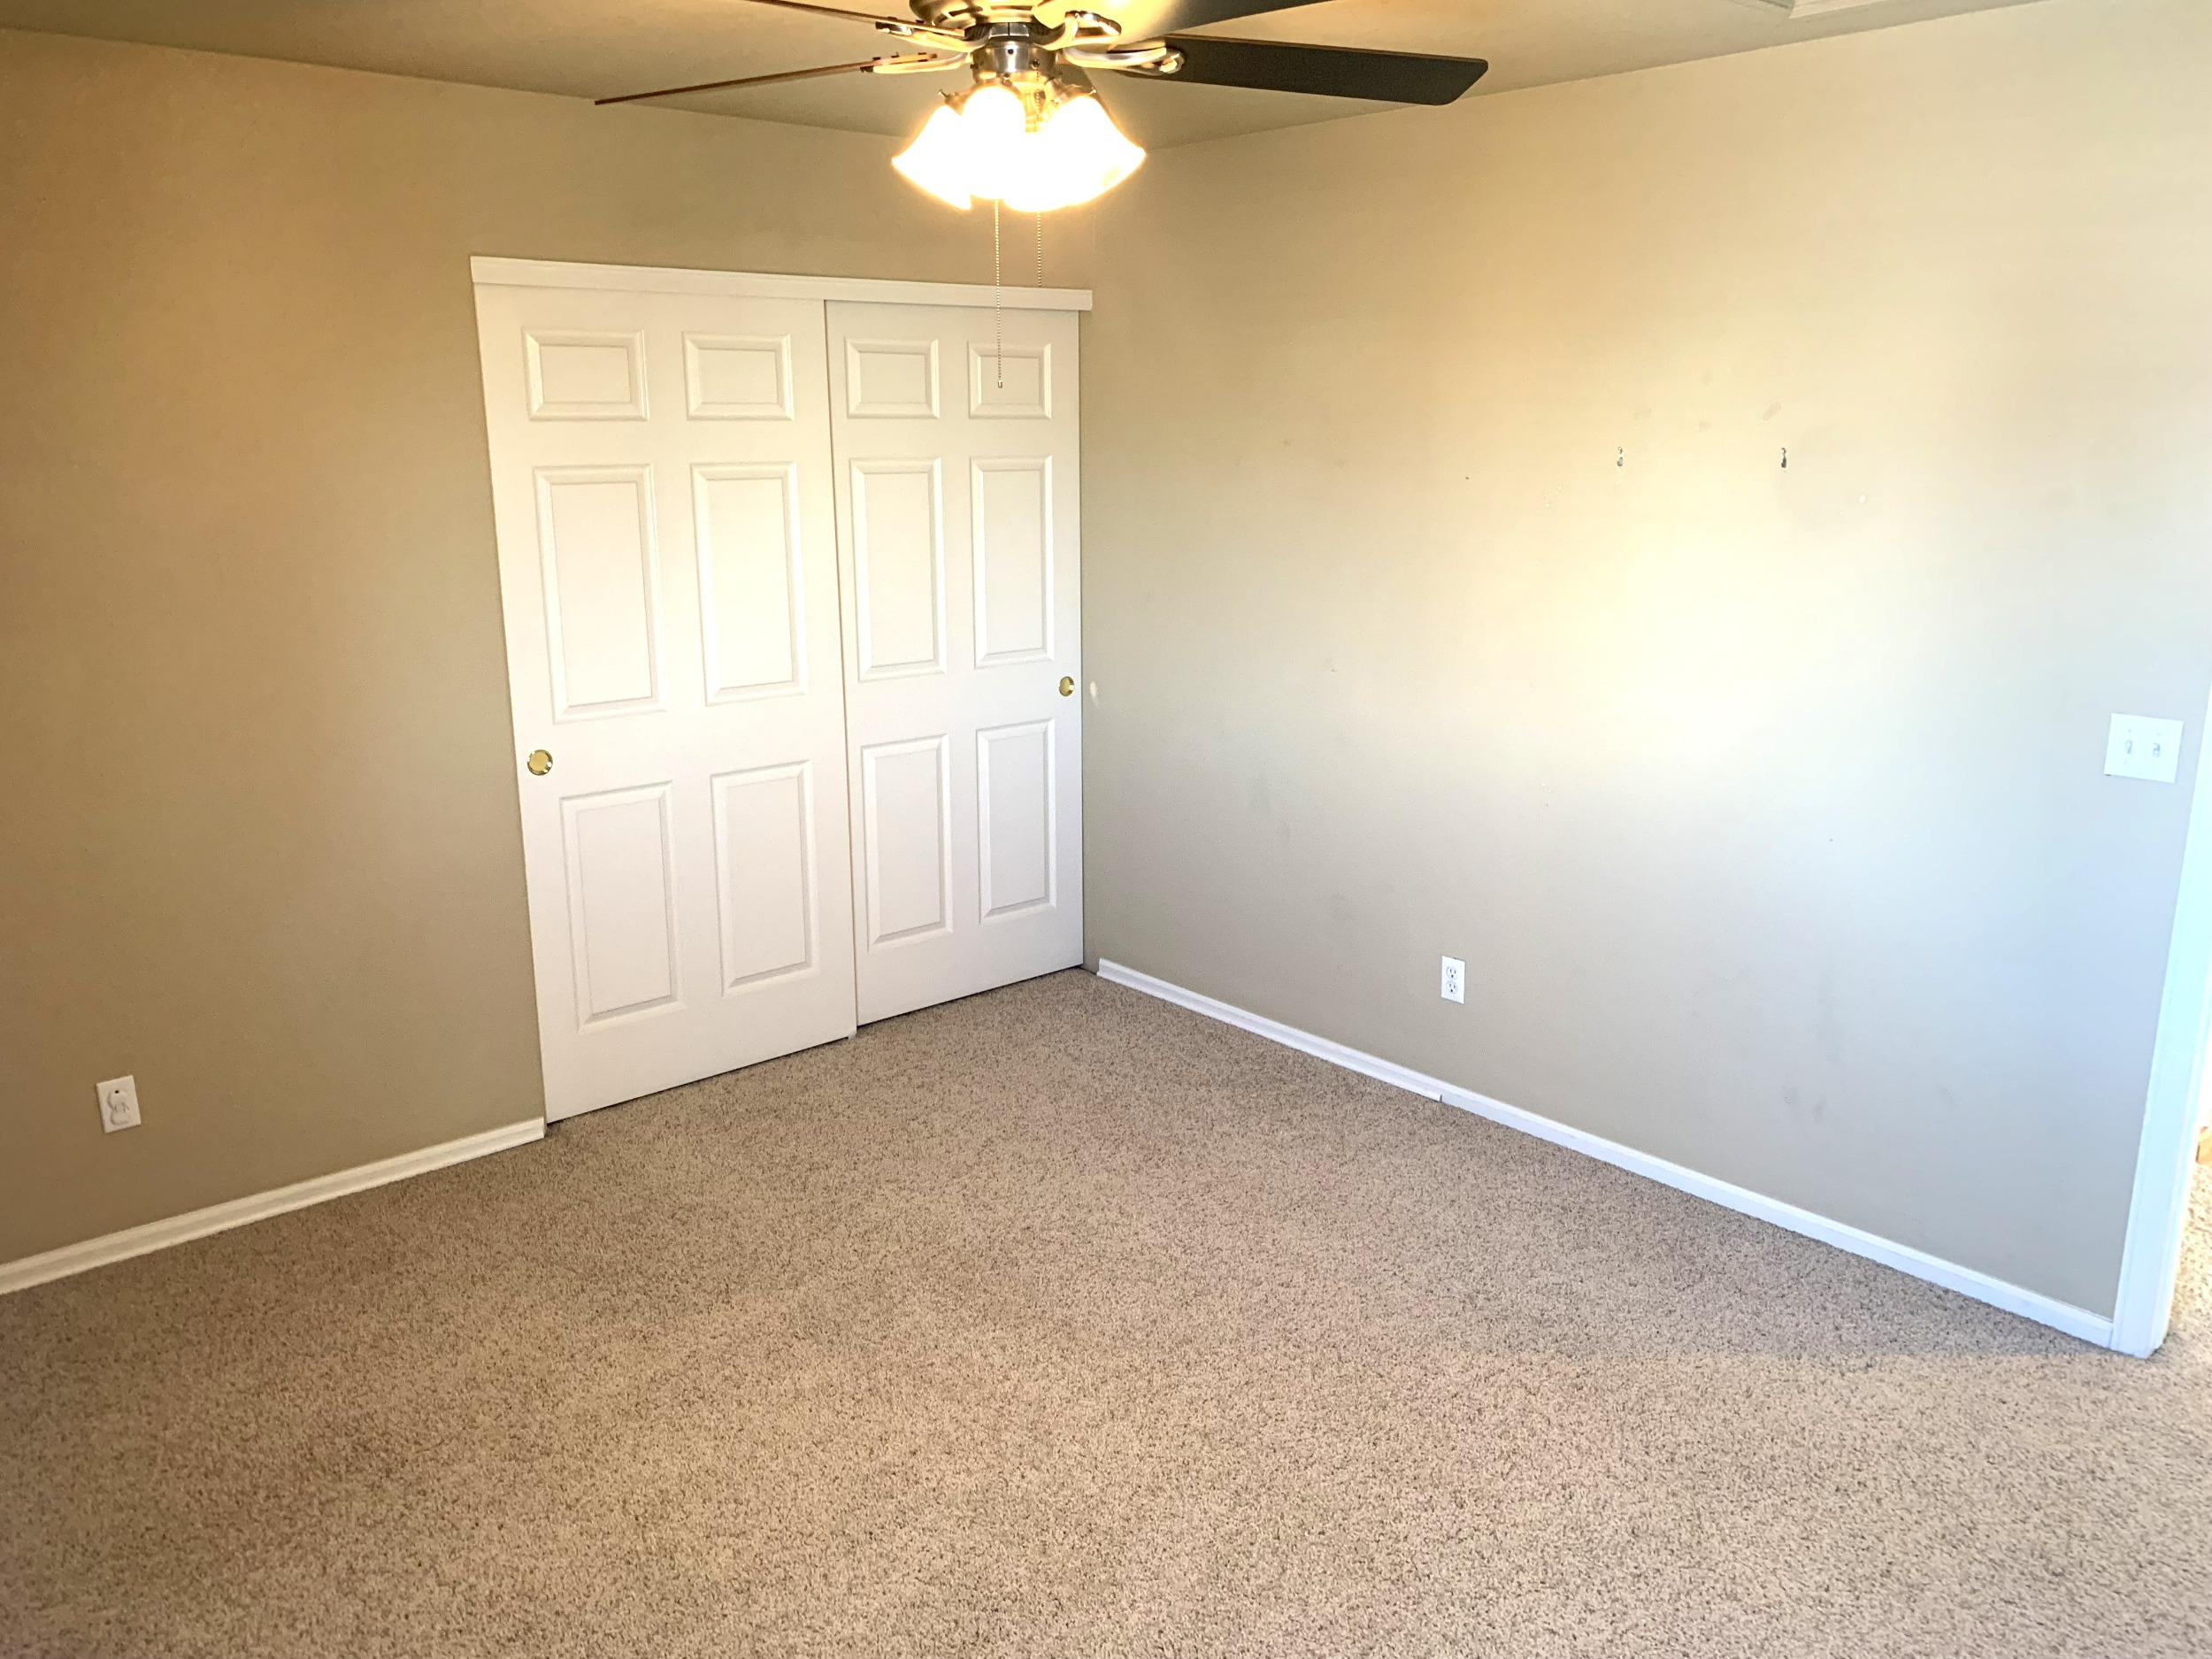 Ceiling Fan and Double Closet in Upper BR